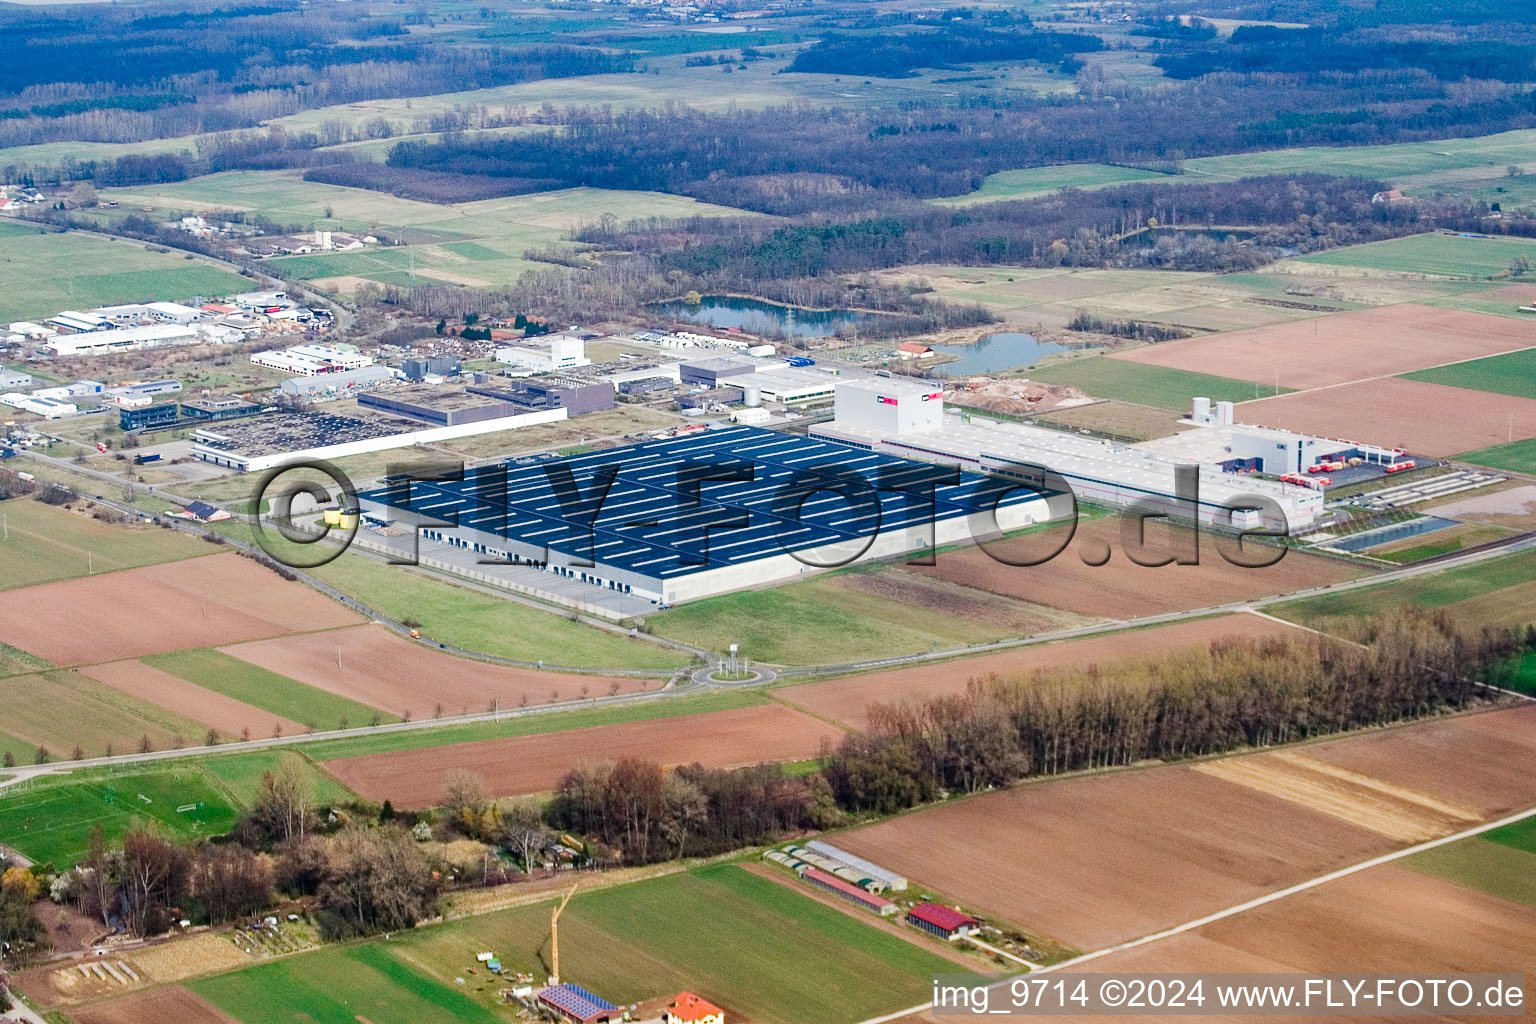 Aerial photograpy of Building and production halls on the premises of Prowell GmbH in Offenbach an der Queich in the state Rhineland-Palatinate, Germany